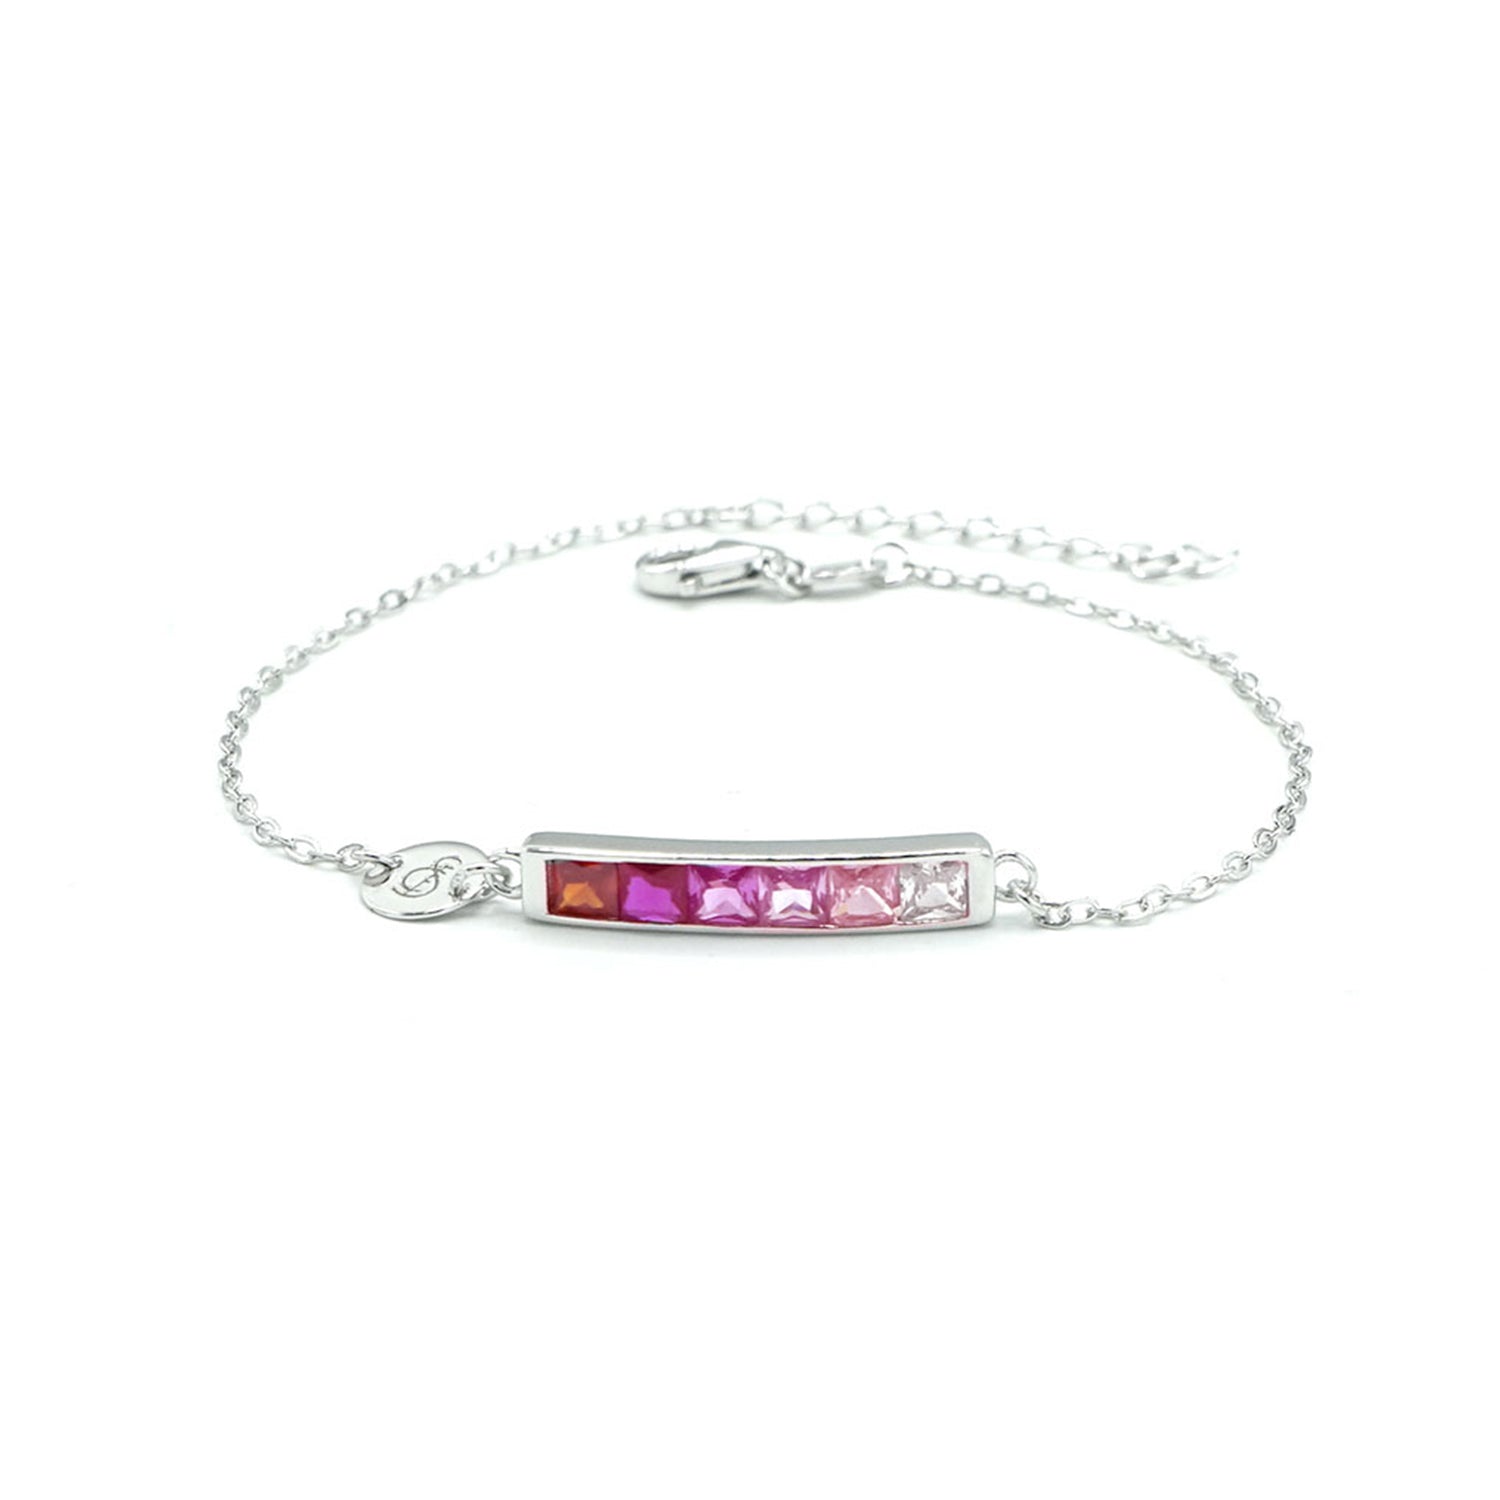 Silver bracelet with red stones